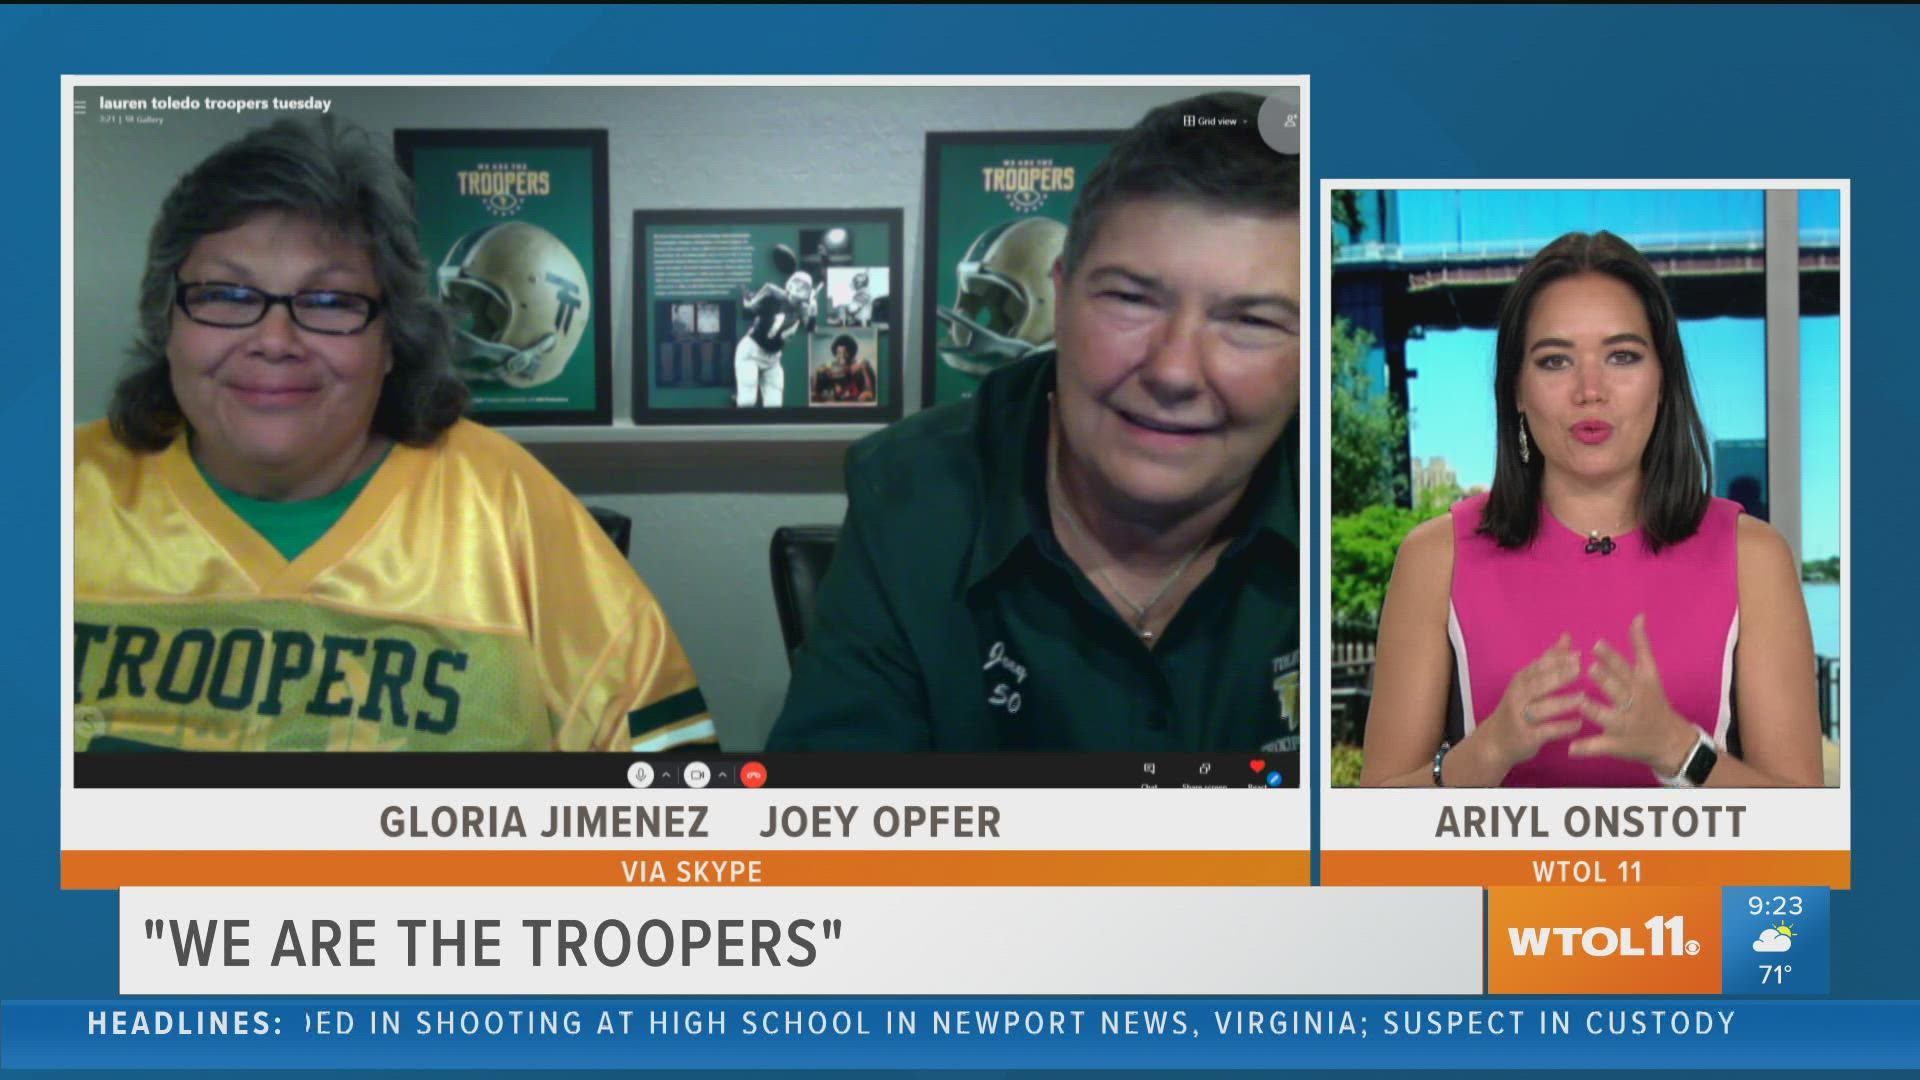 The winningest football team in Pro Football history were not only women, but from Toledo! “We are the Troopers” tells the story of the Toledo Troopers this weekend.